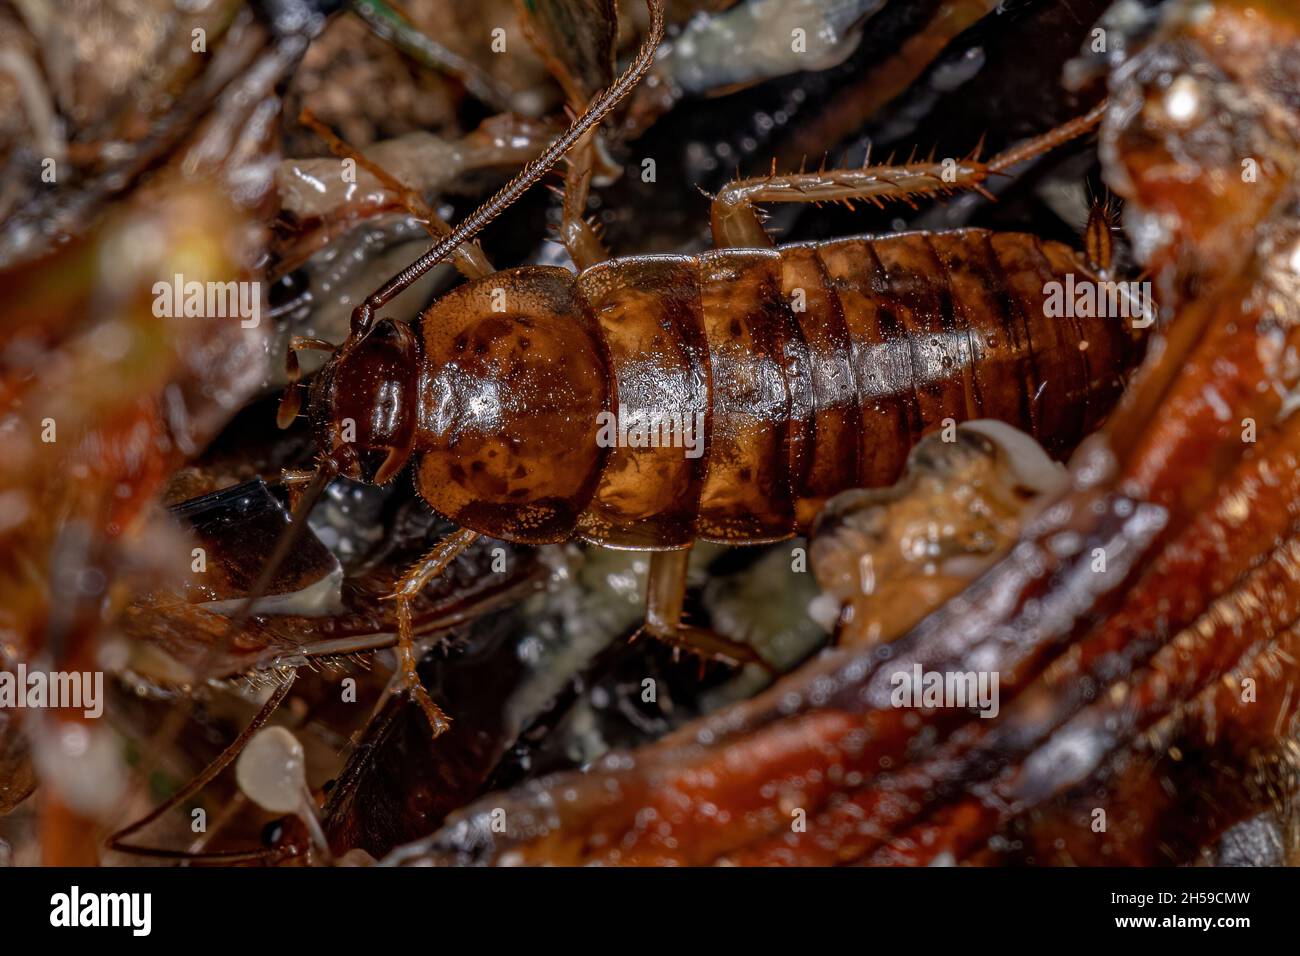 Small Wood Cockroach Nymph of the Family Ectobiidae inside a cicada eating its insides Stock Photo